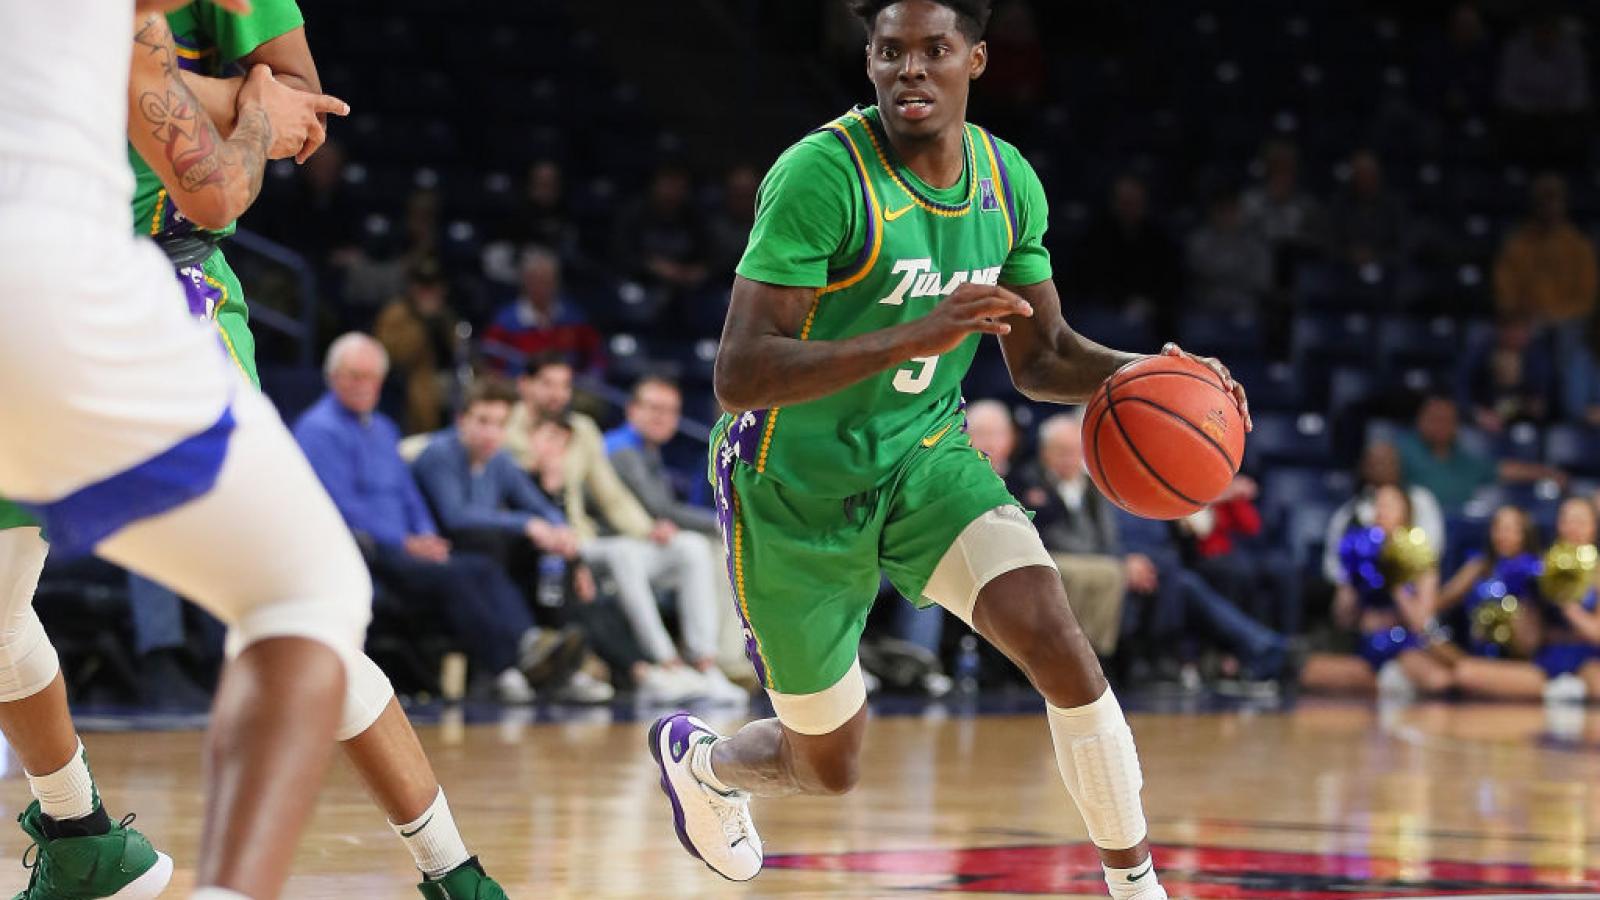 Tulane basketball star charged in connection with fatal shooting Just